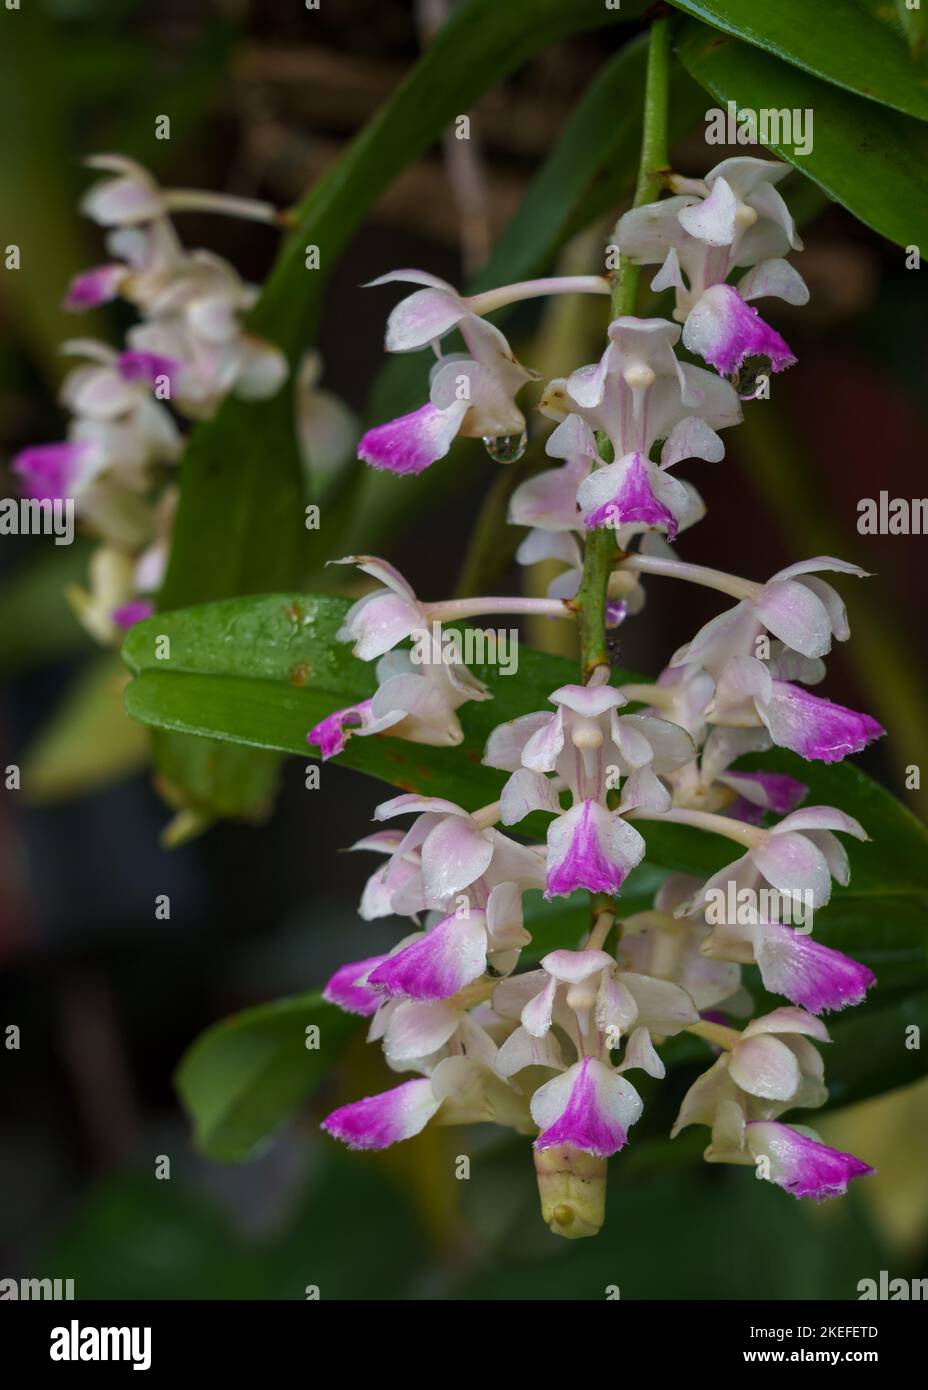 Closeup view of tropical epiphytic orchid species aerides falcata with colorful white and purple pink flowers blooming outdoors on natural background Stock Photo